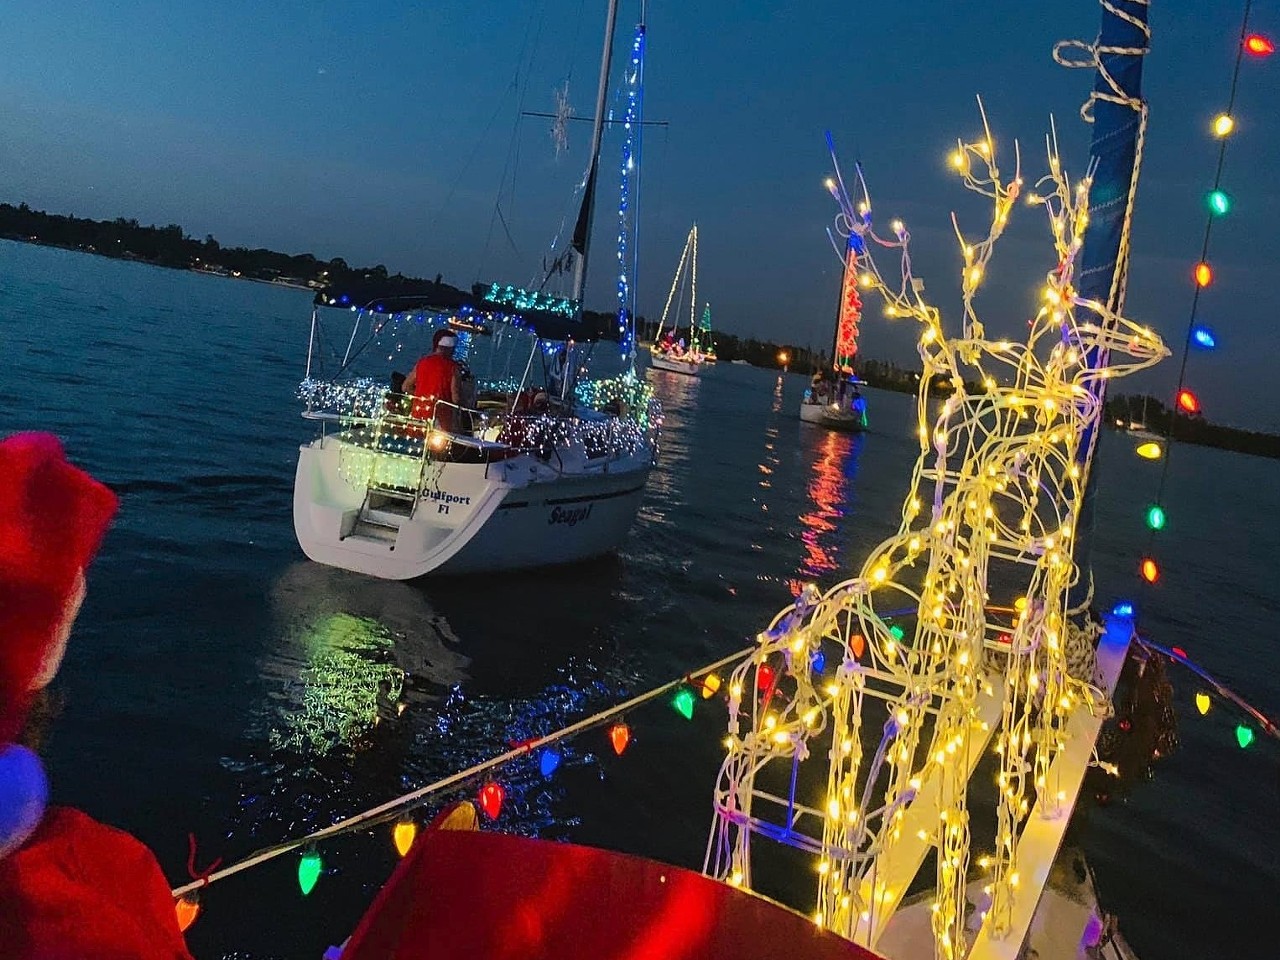  Boca Ciega Yacht Club Christmas Boat Parade
Boca Ciega Yacht Club, 4600 Tifton Dr. S., Gulfport
Dec. 9
Beginning at 6 p.m., Boca Ciega Yacht Club is hosting its 38th annual Christmas Boat Parade. The parade will begin at Gulfport Municipal Marina and continue throughout Gulfport. Boat skippers will be required to donate two unwrapped toys to Operation Santa, Gulfport’s annual toy drive in order to participate. 
Photo via Boca Ciega Yacht Club/Facebook